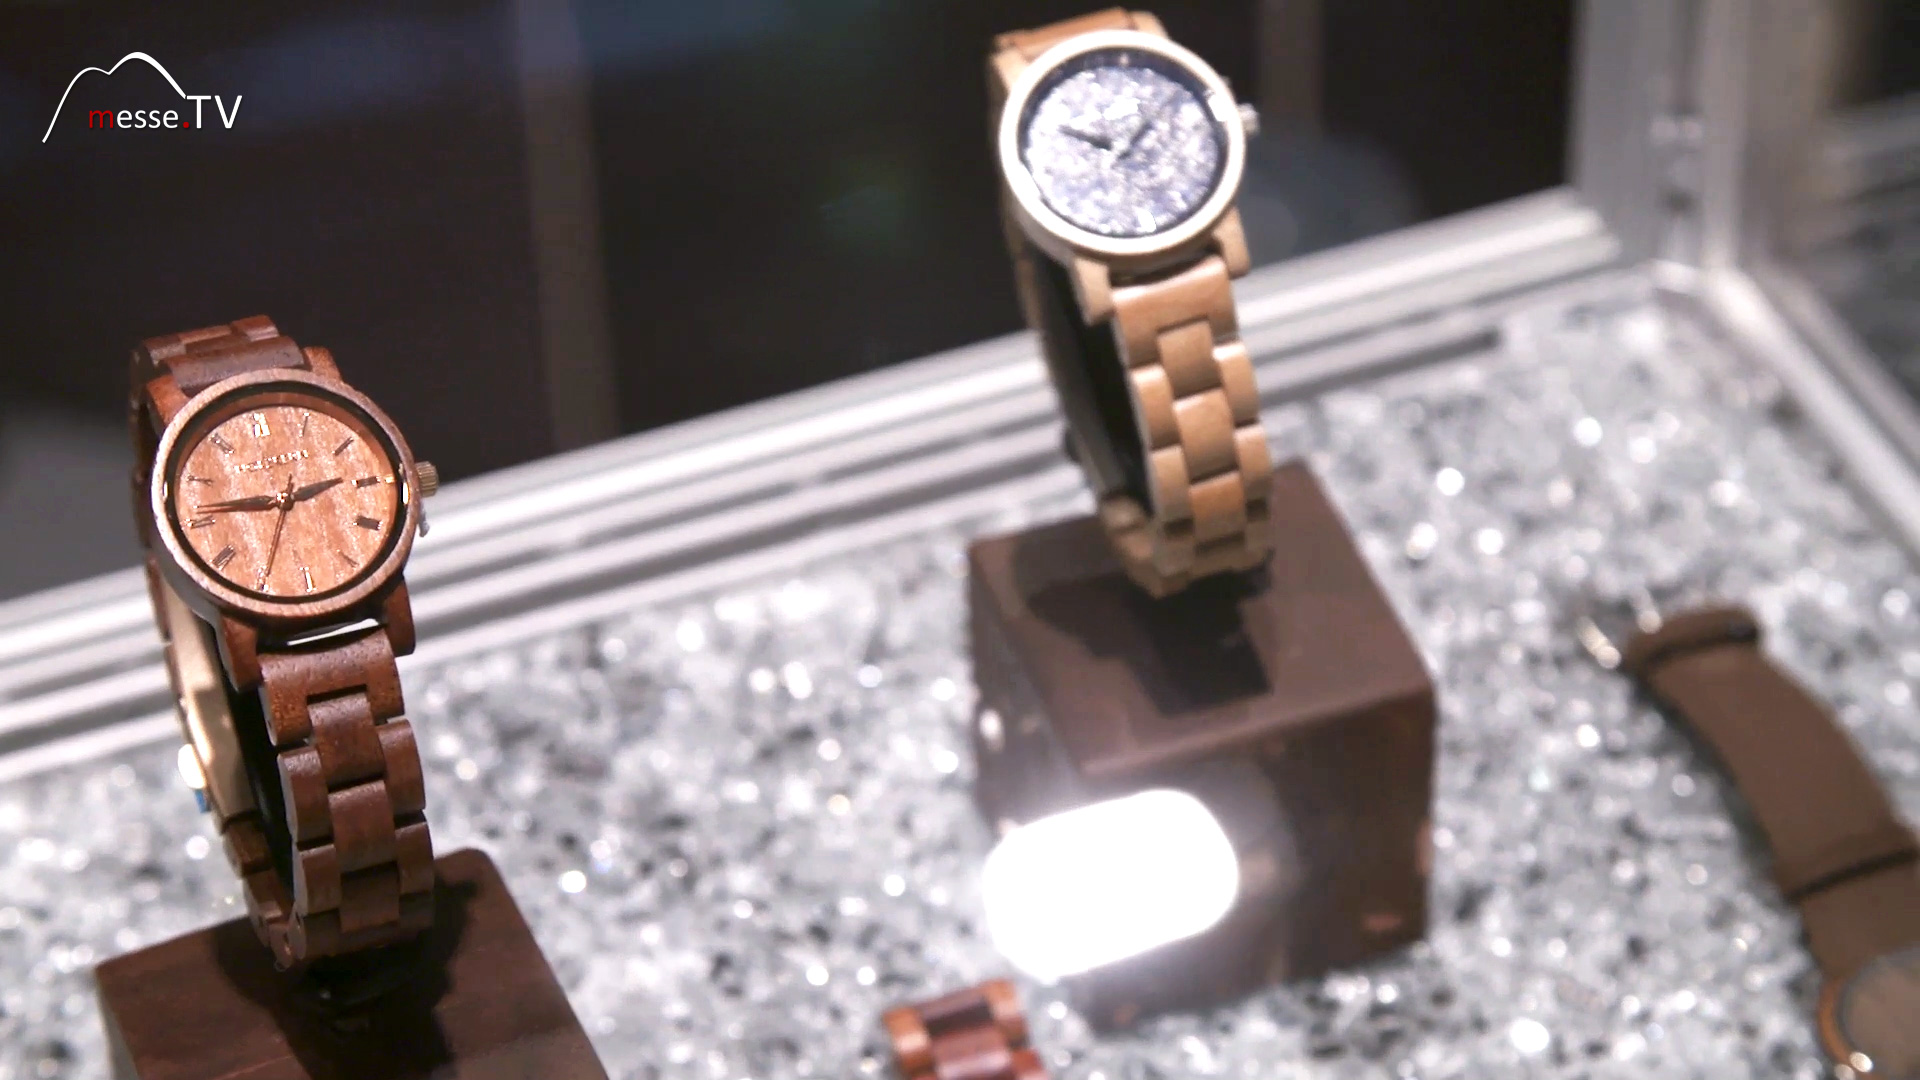 HOLZKERN watches made of precious wood